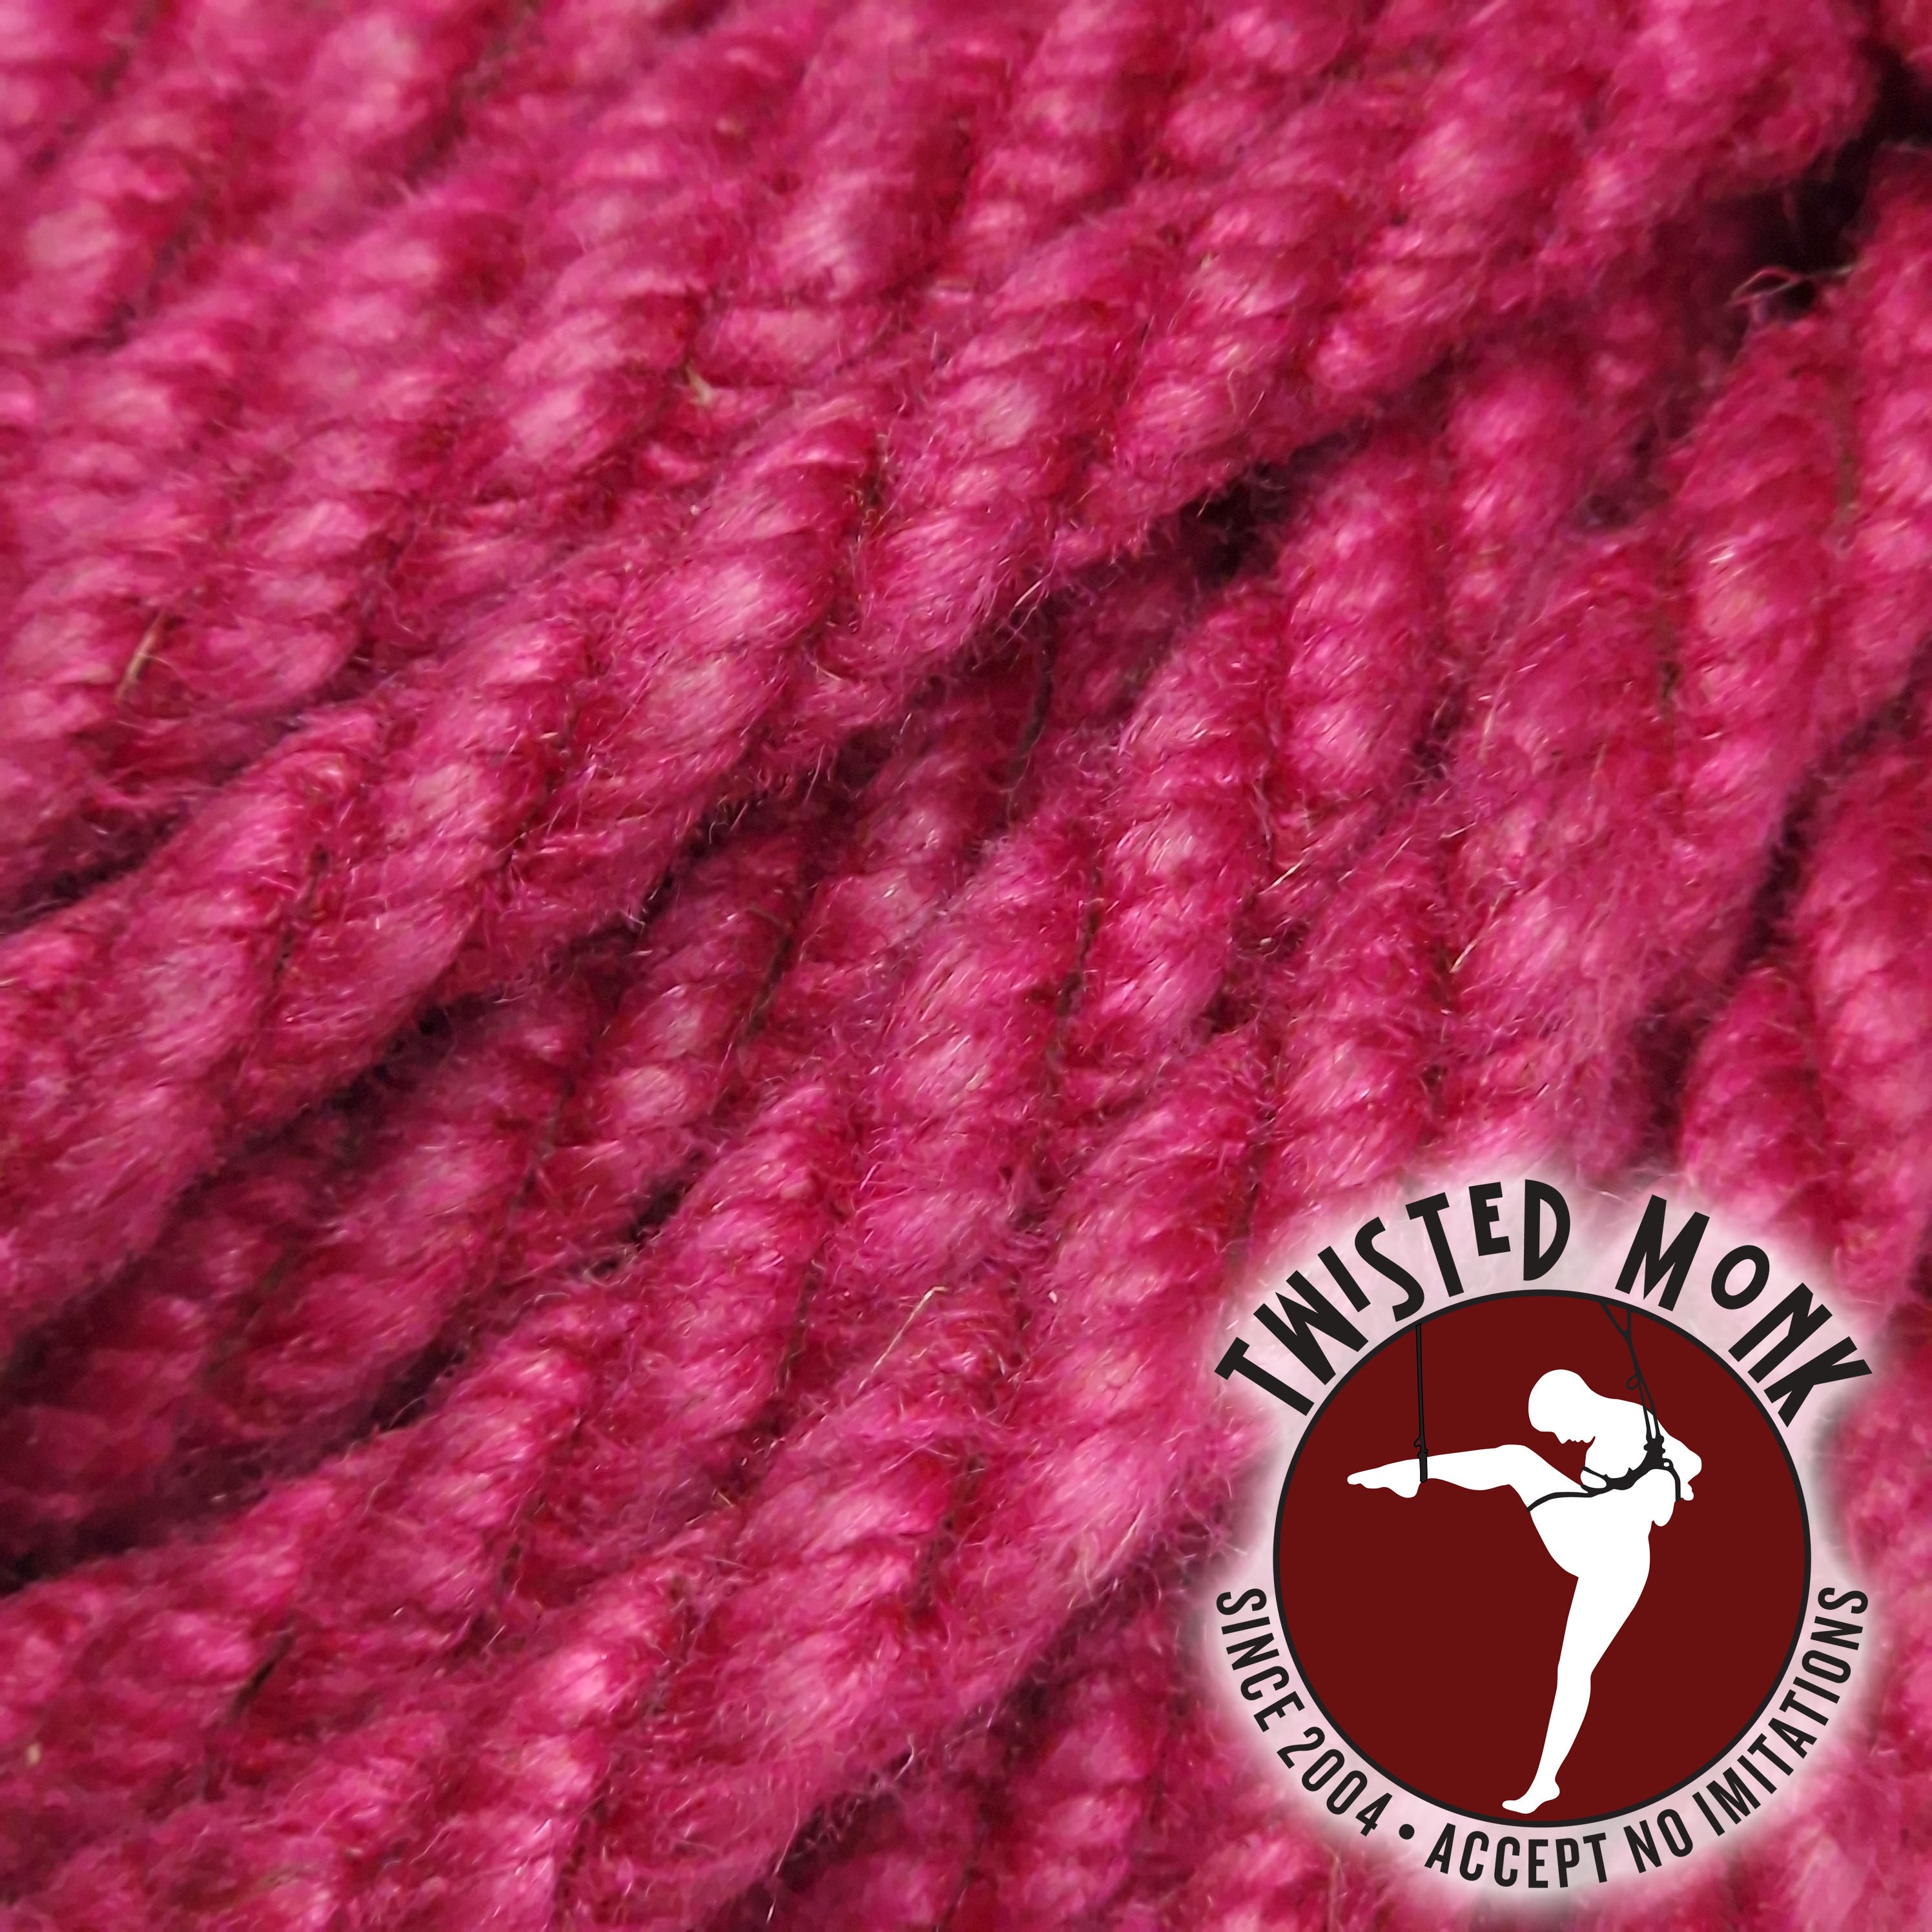 Hand-Spun Raw Silk Rope - The Twisted Monk